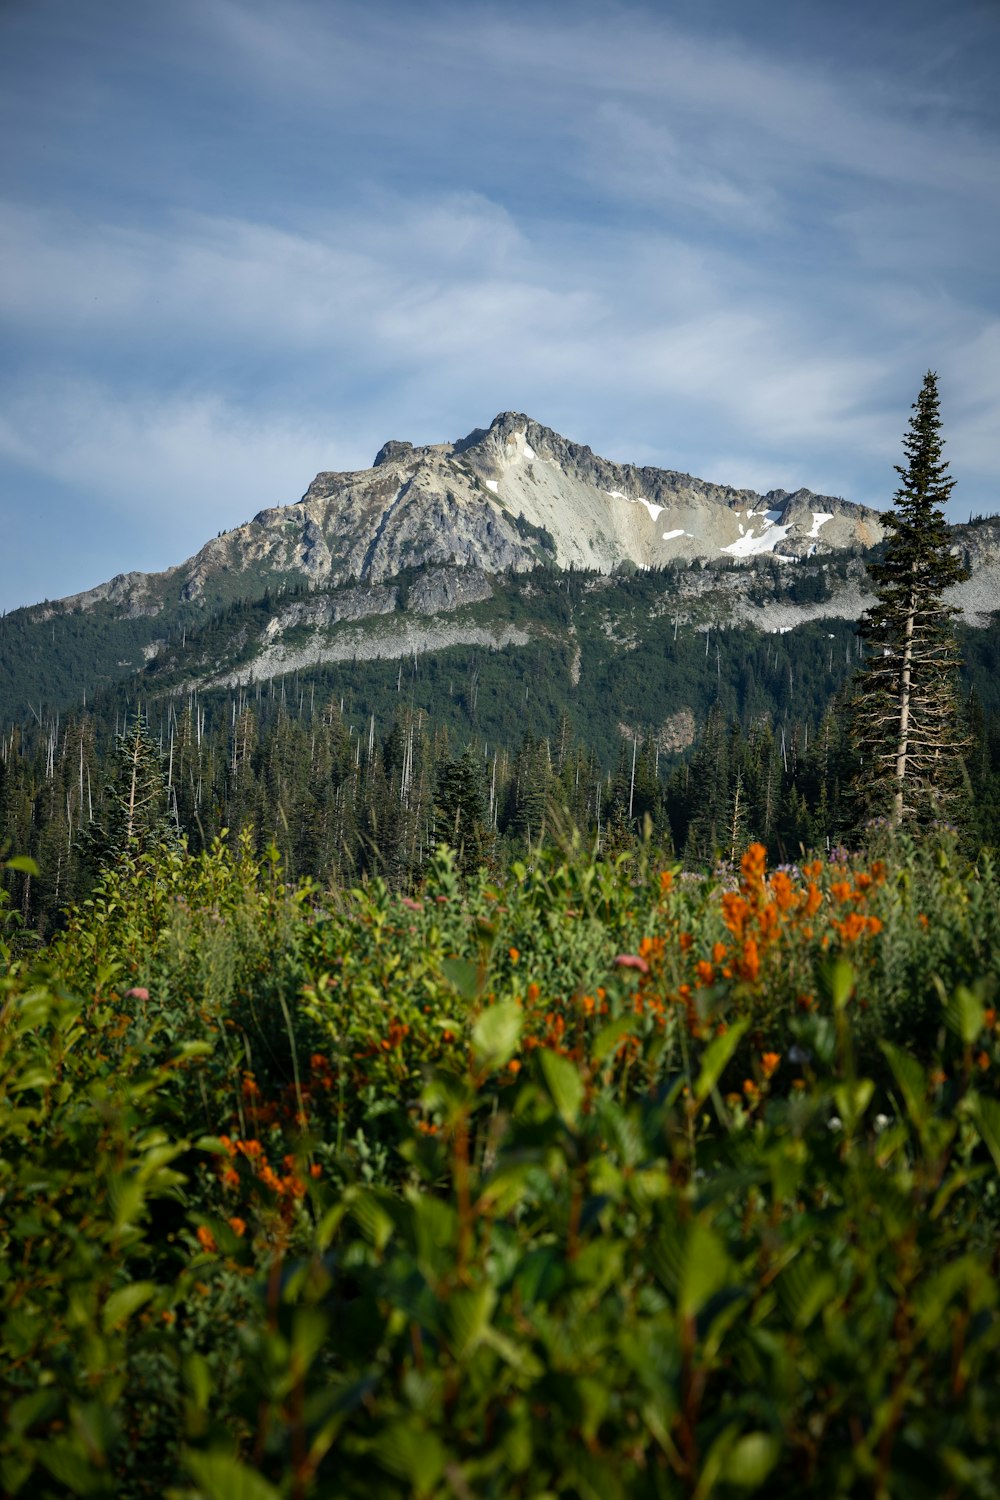 a view of a mountain with trees and flowers in the foreground